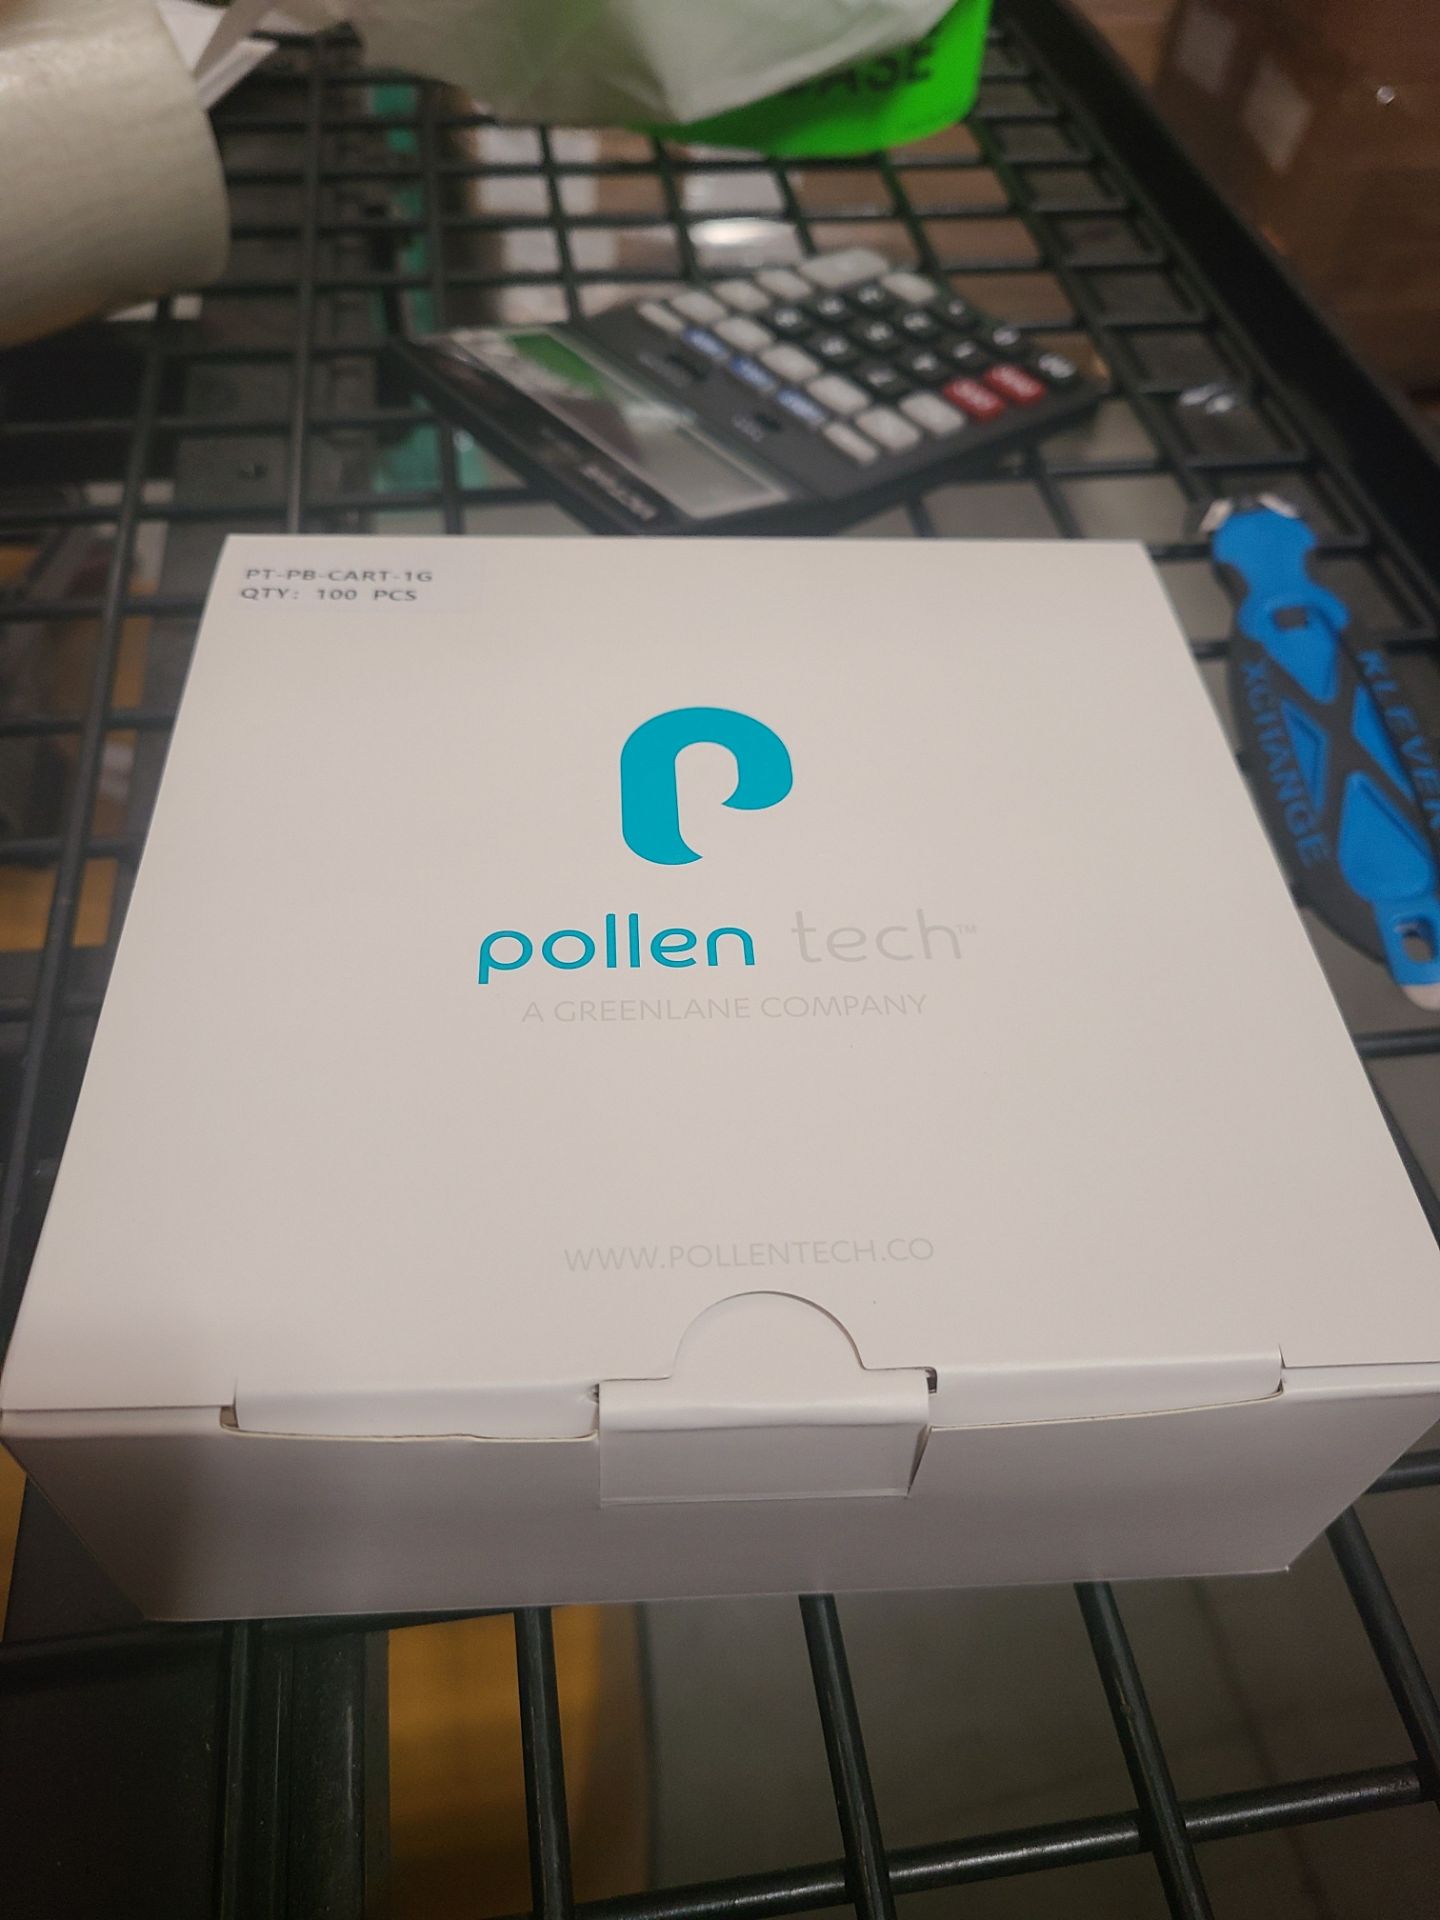 (Located in Moreno Valley, CA) Pollen Tech Plastic Body Screw-In Cartridge - 1.0 Gram 1.8mm, Qty - Image 2 of 4